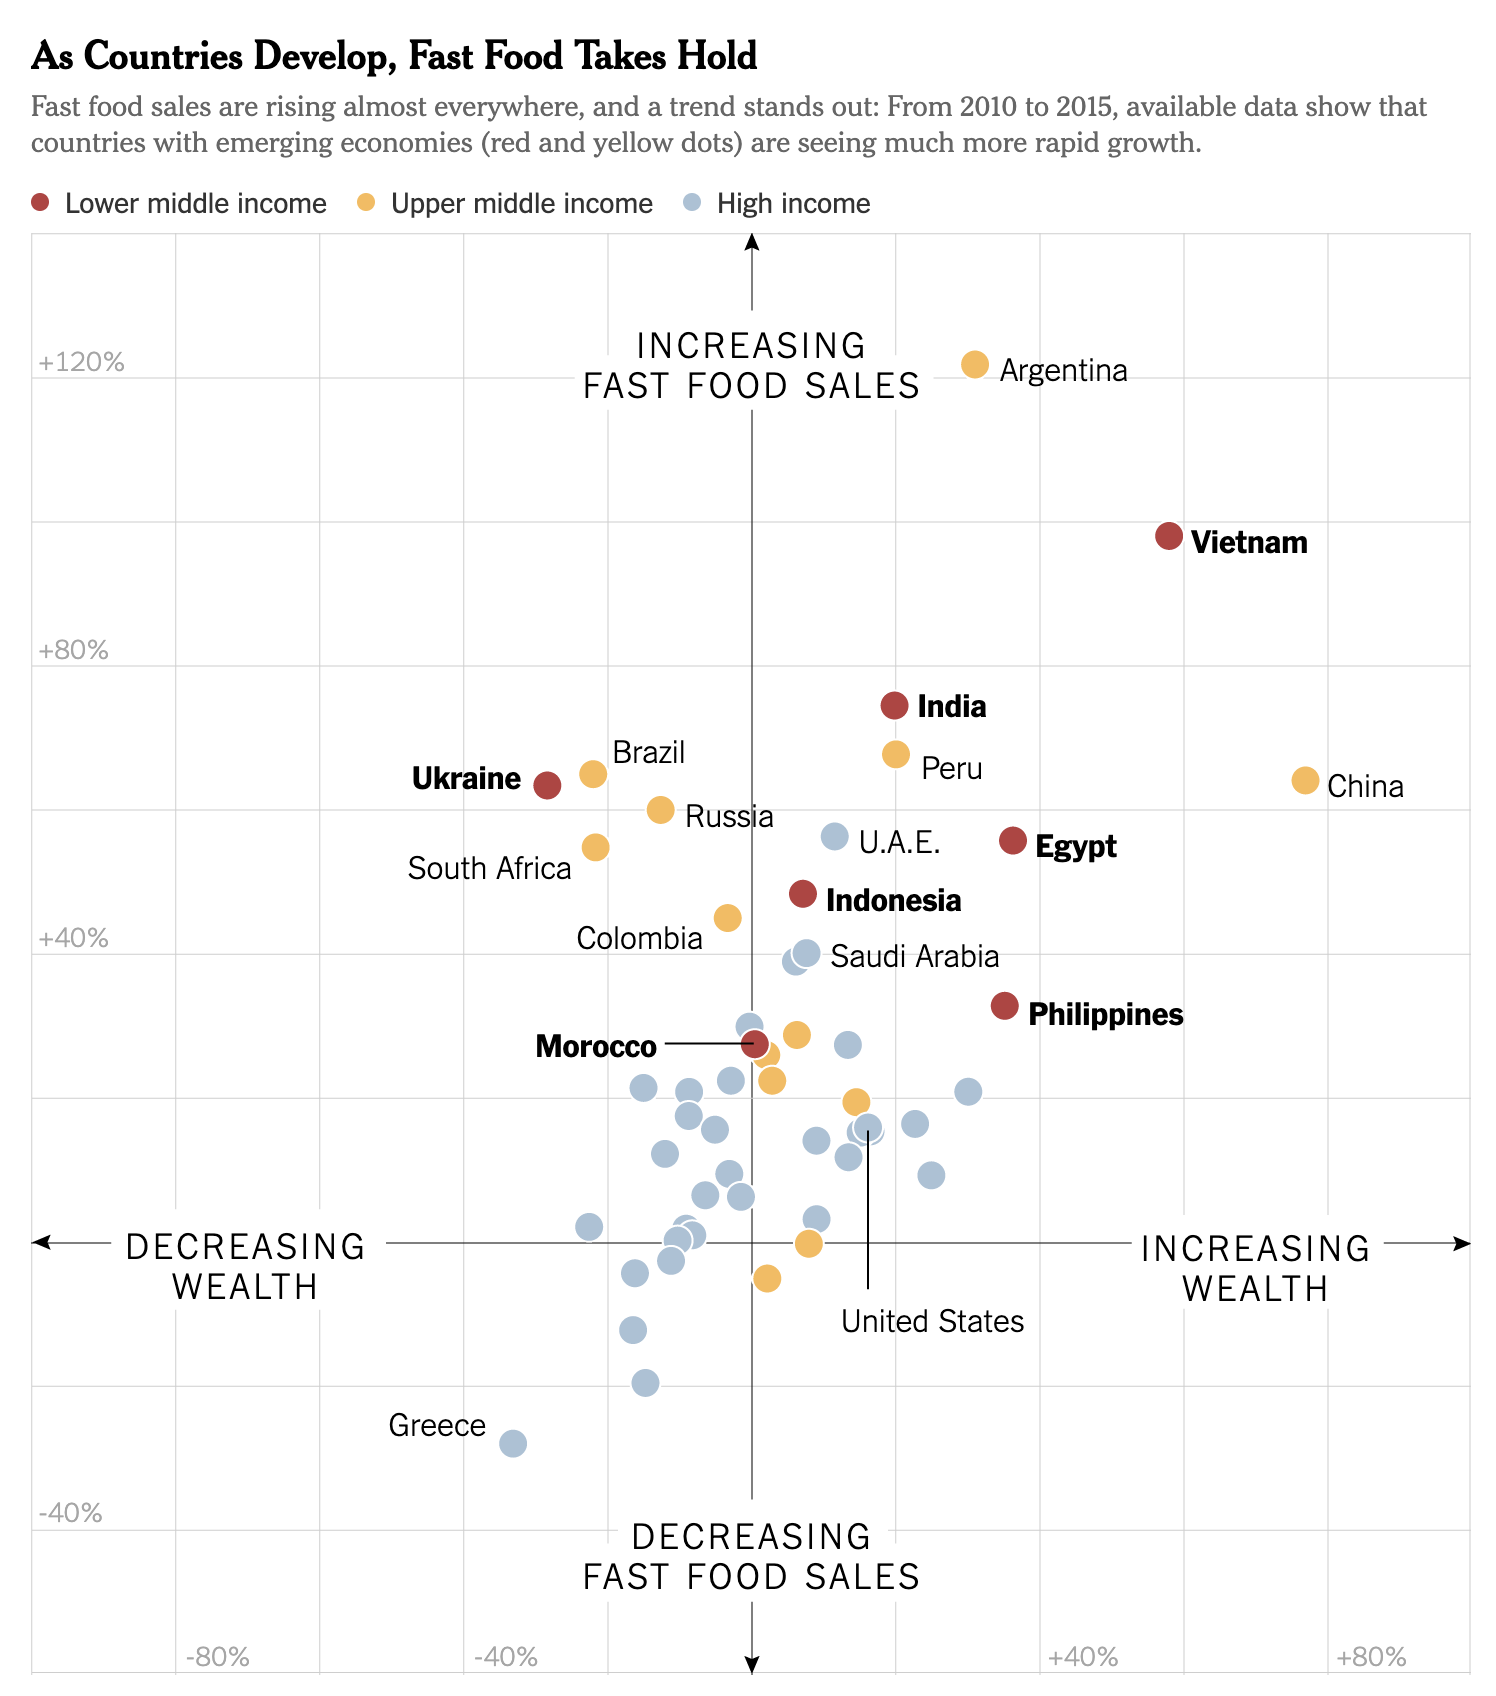 A scatter plot titled 'As Countries Develop, Fast Food Takes Hold', showing the wealth and fast food sales of countries